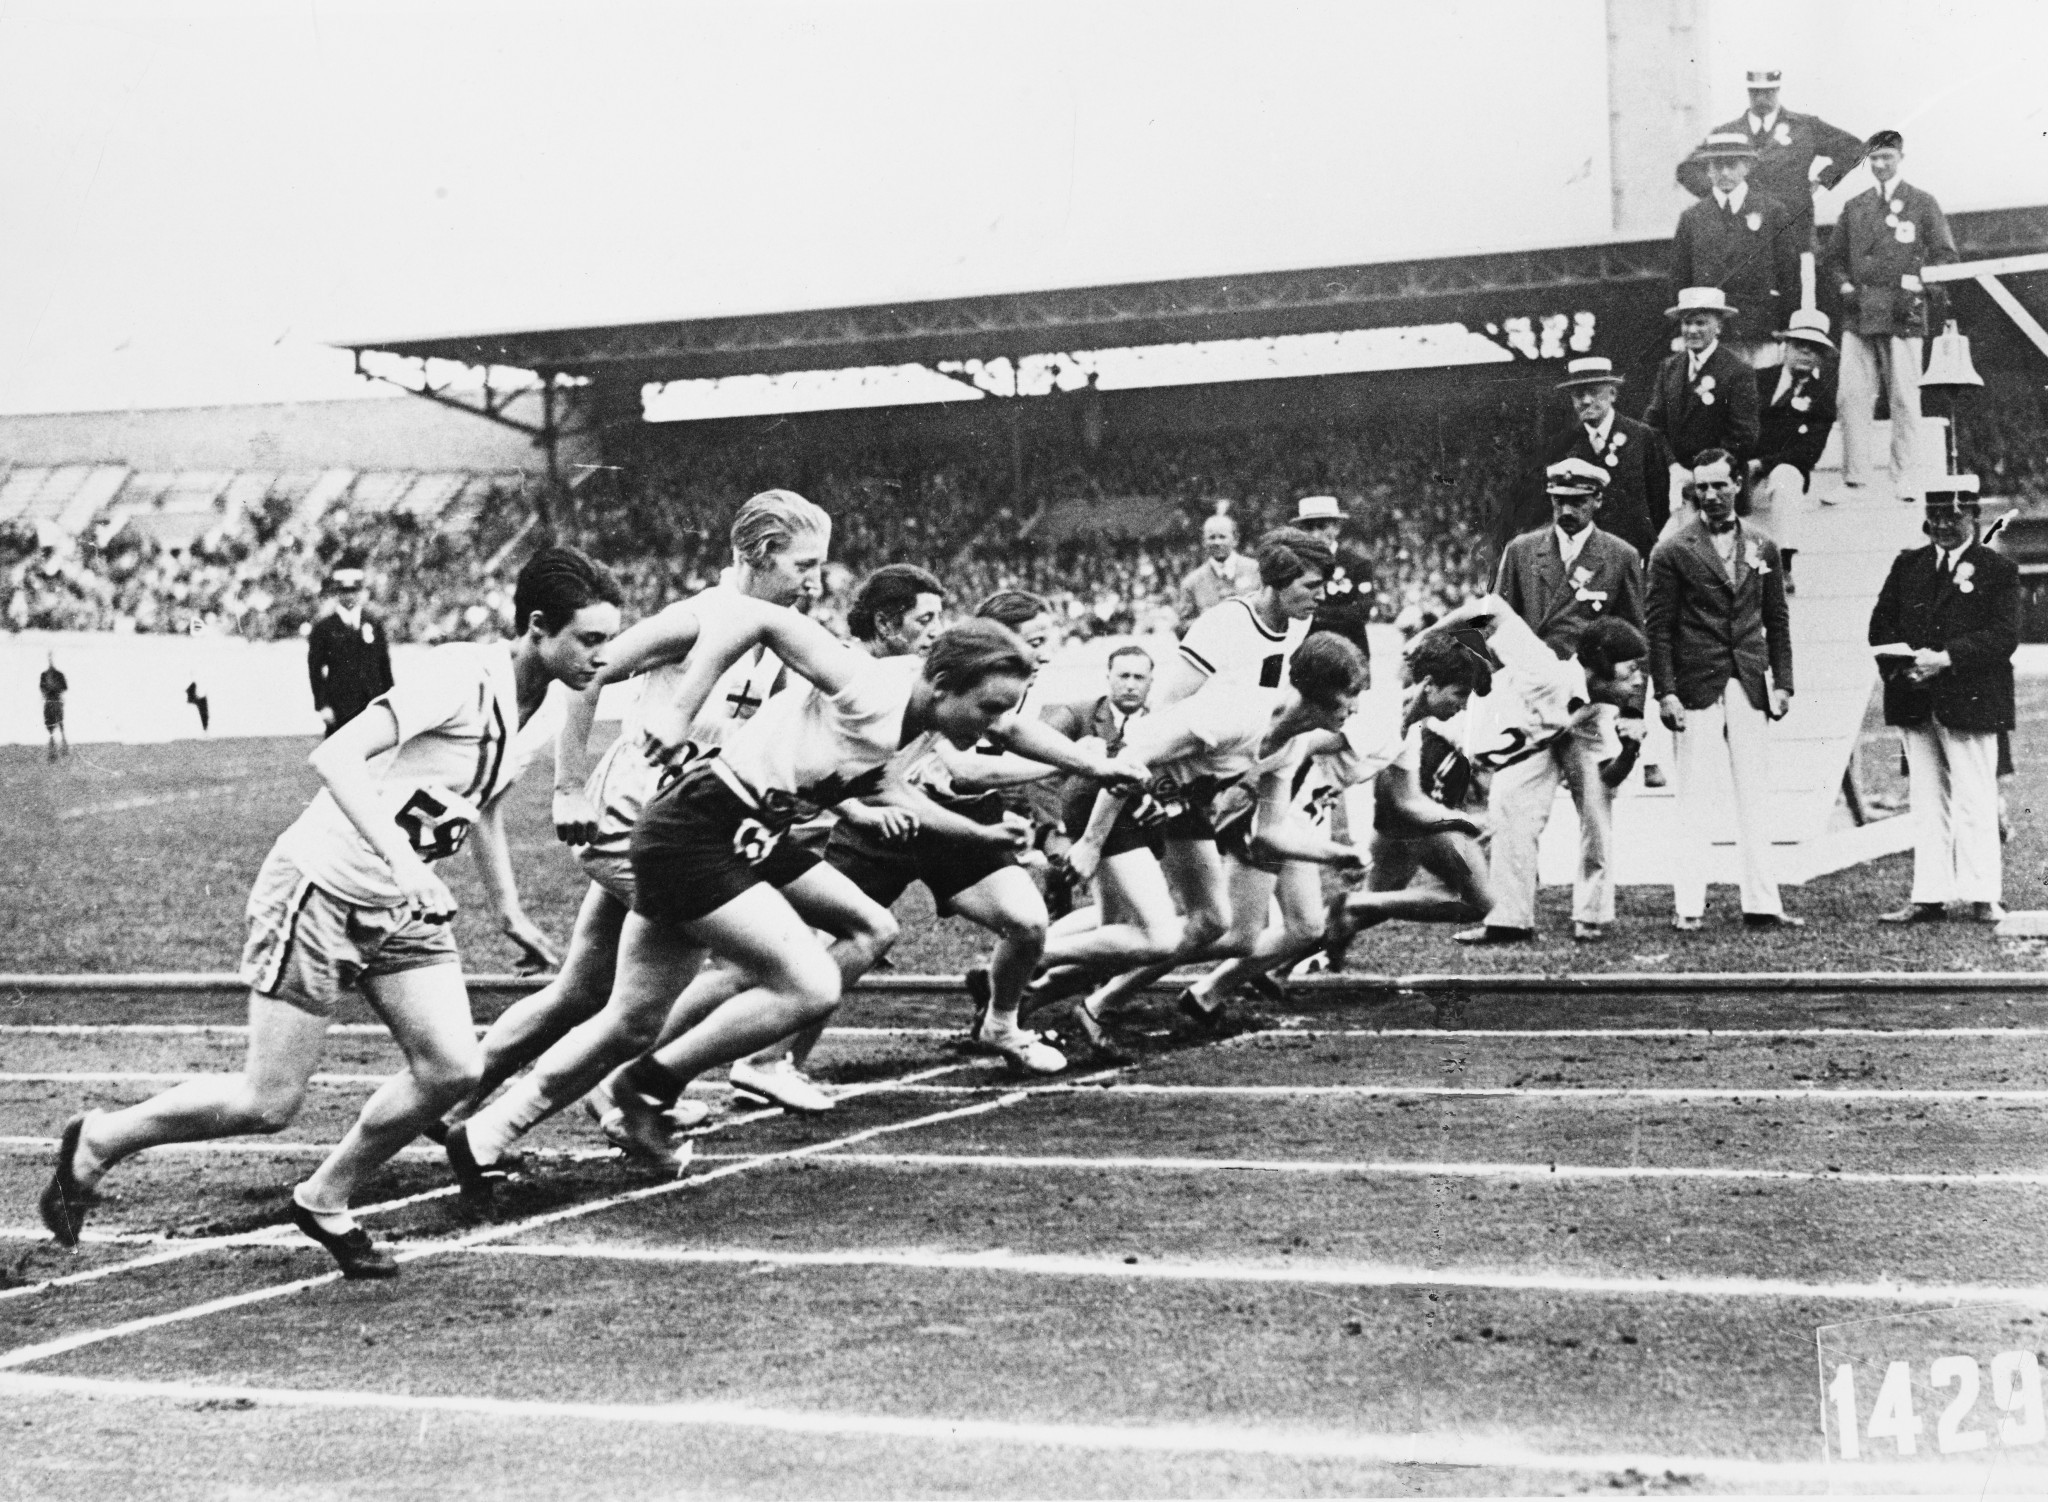 Women's athletics was introduced to the Olympics at Antwerp 1928 but the longest distance on the programme was only 800 metres ©Getty Images